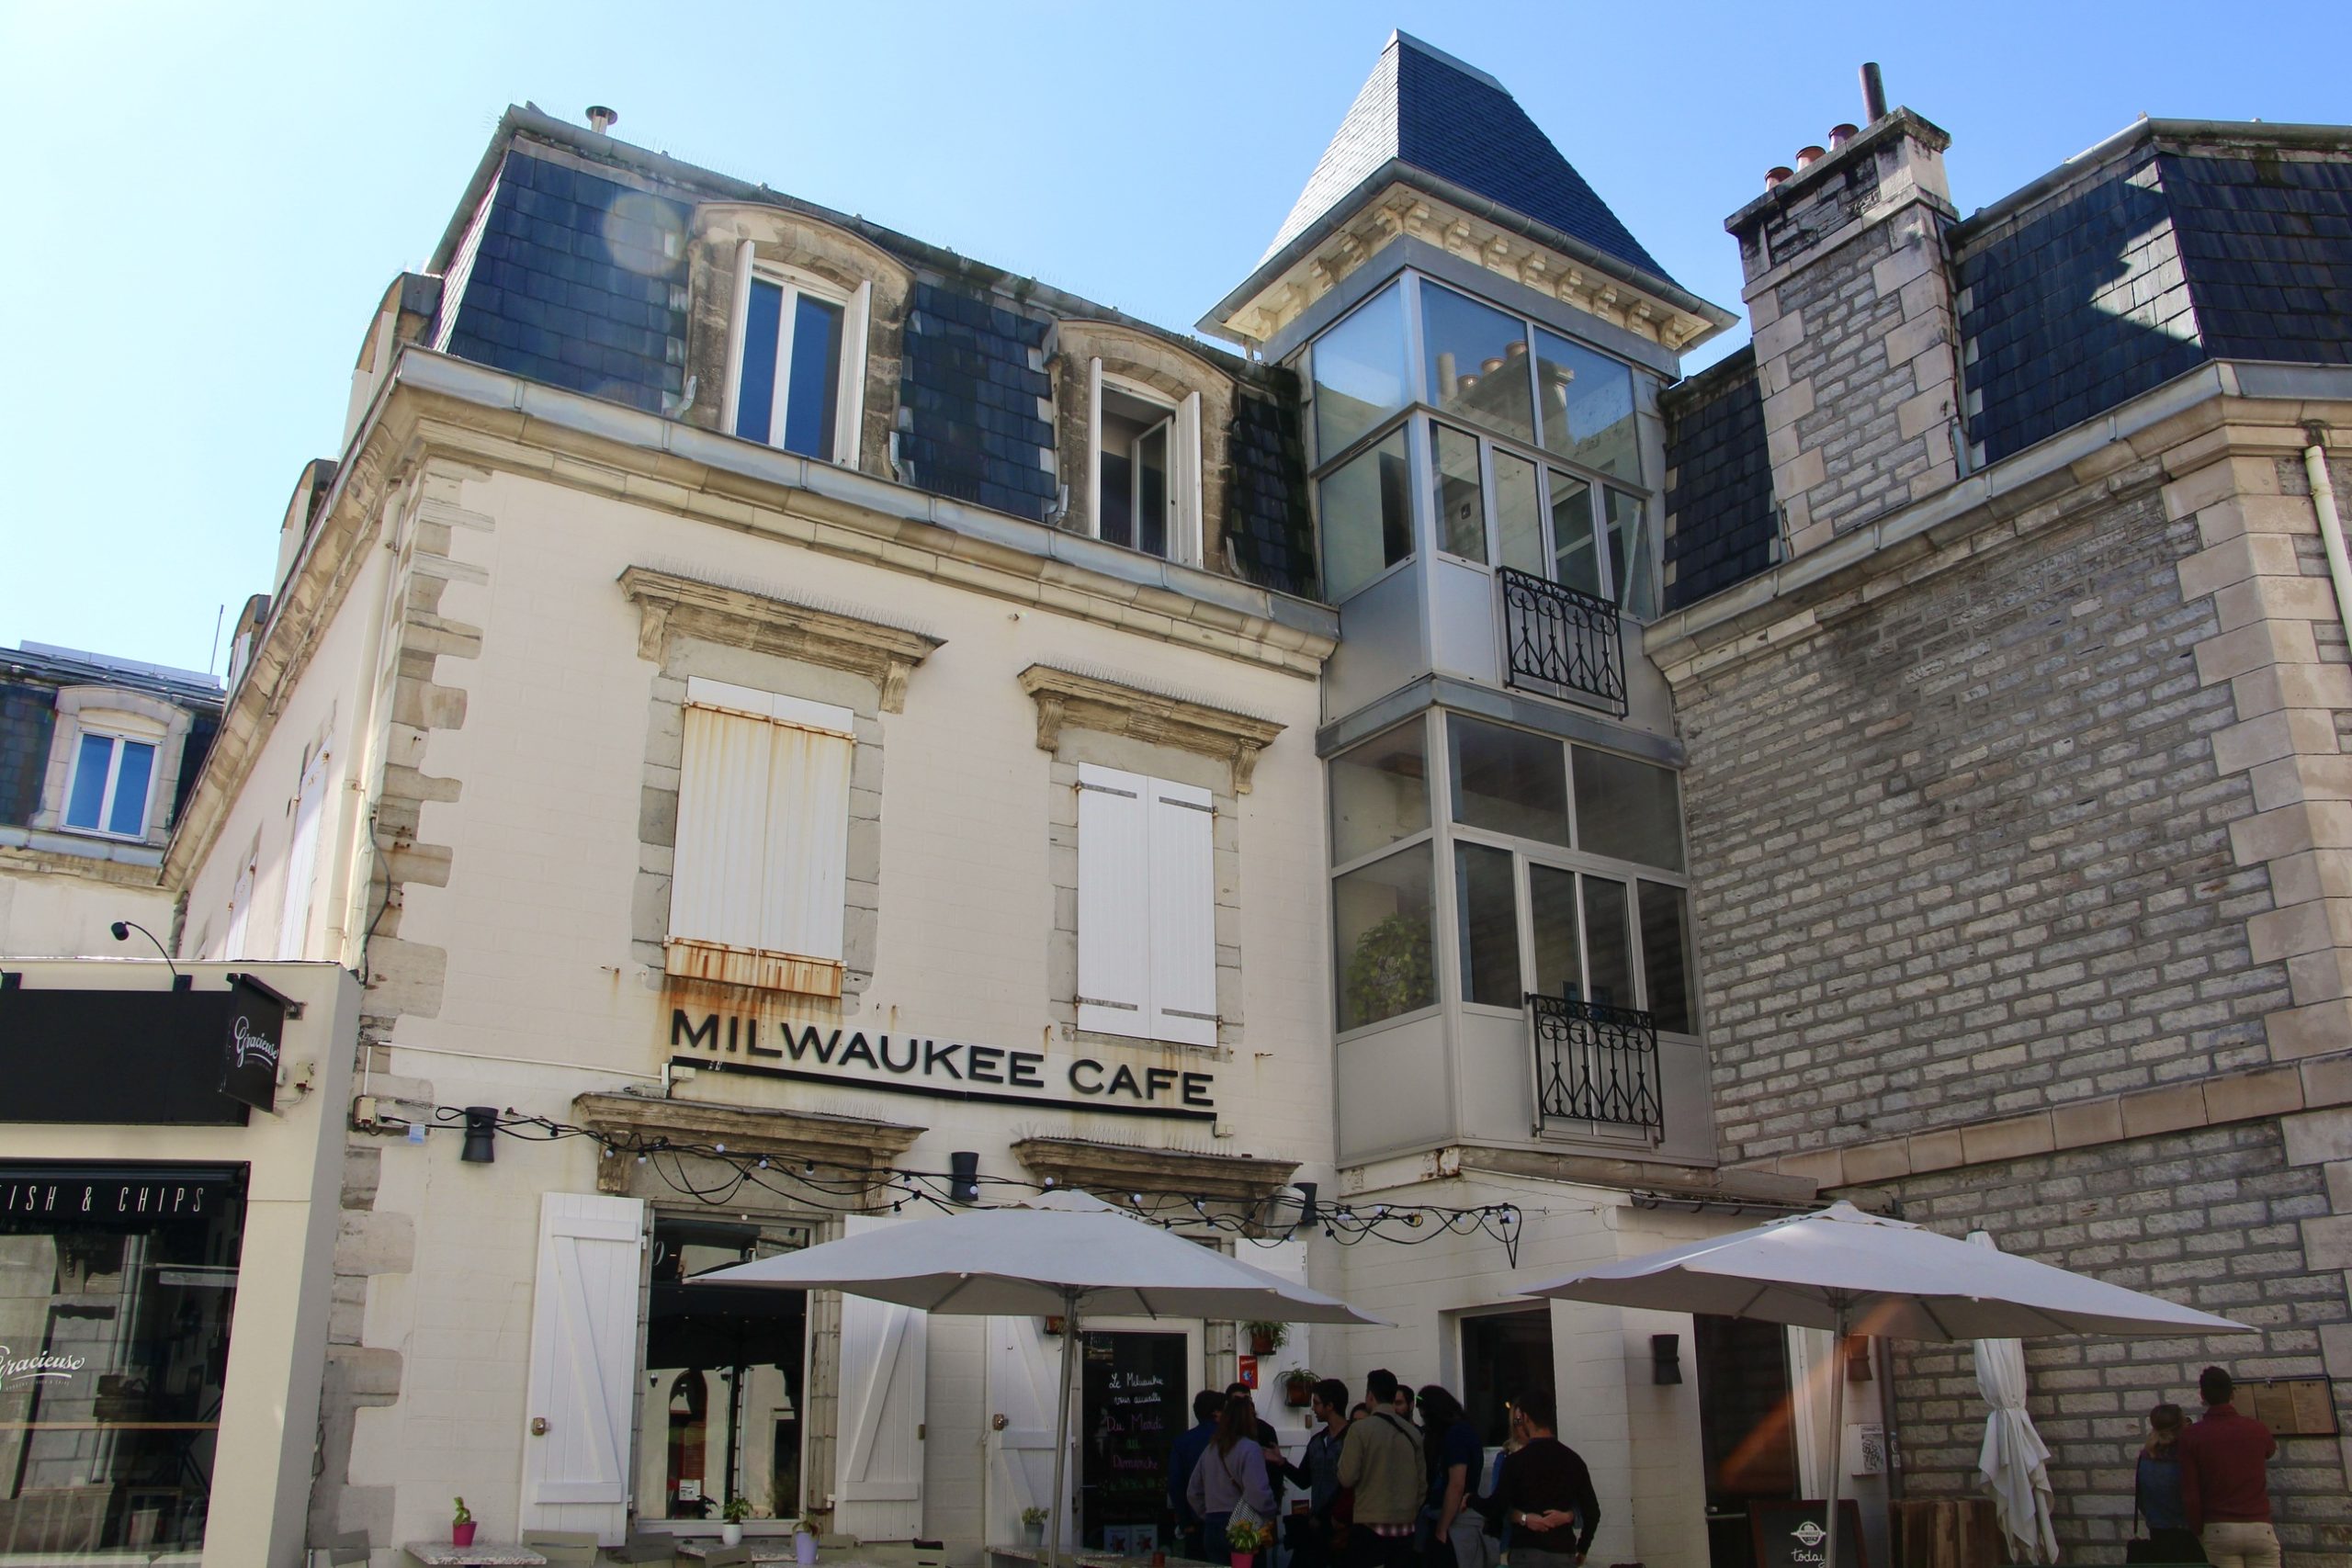 The Milwaukee Café in Biarritz, France.